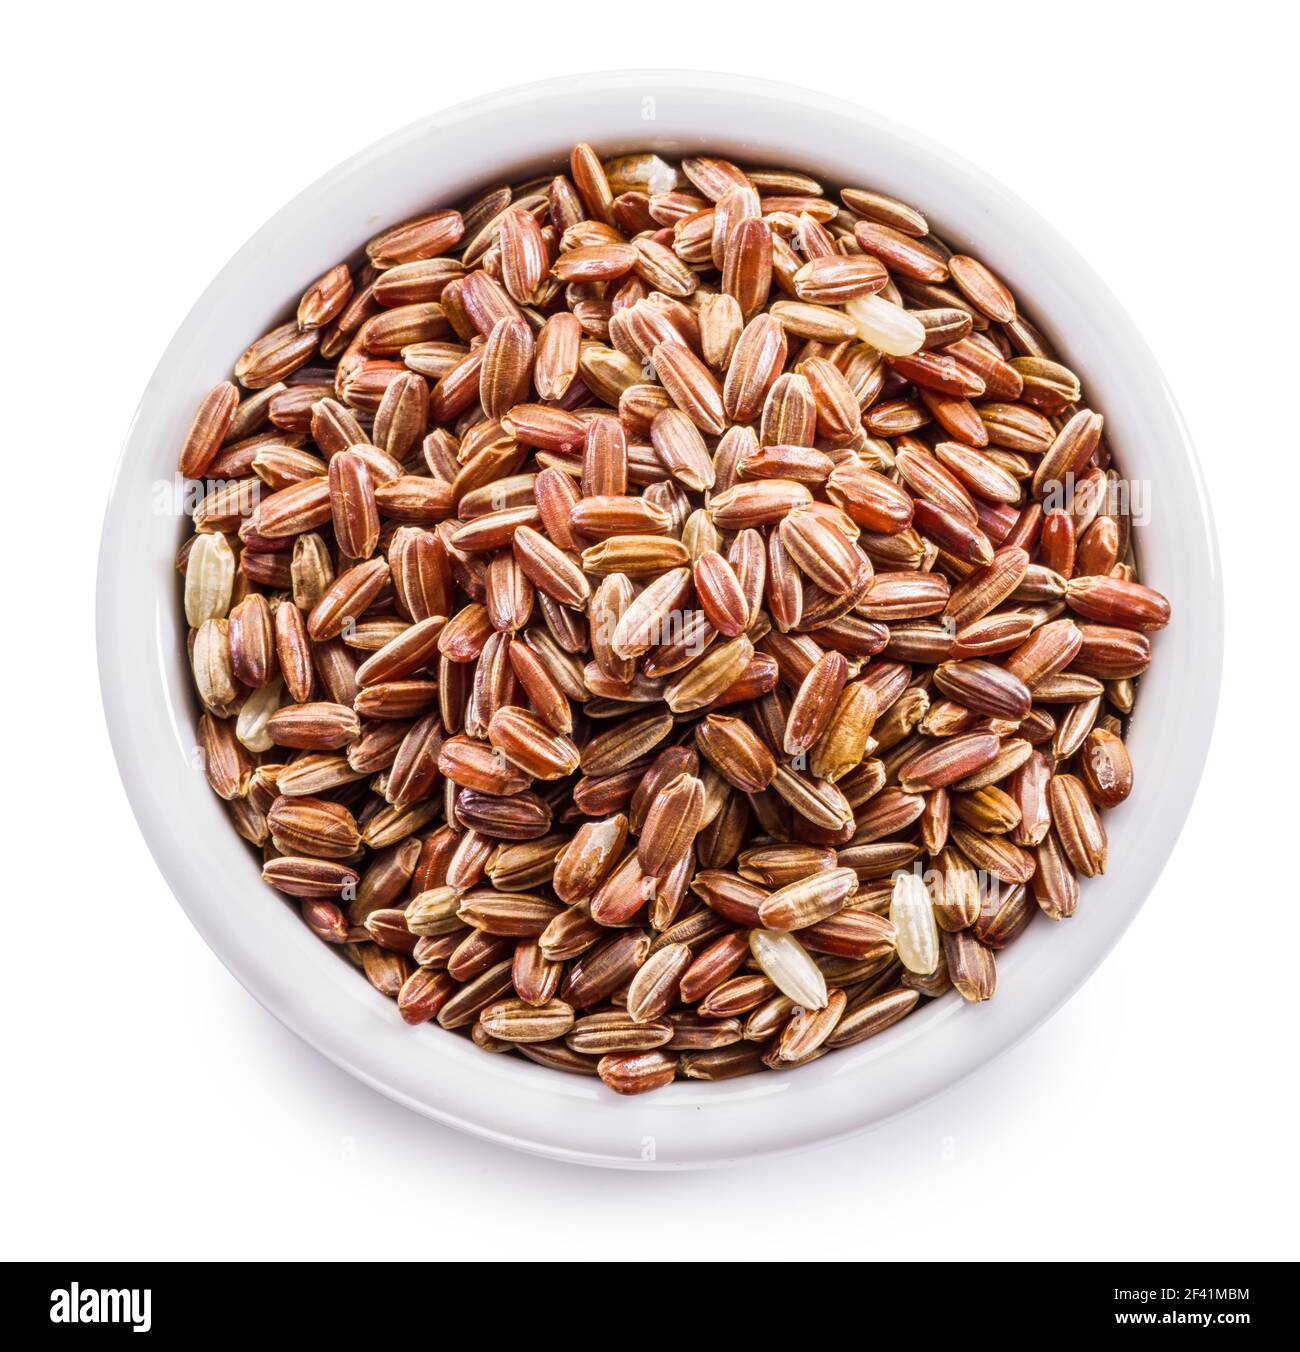 Brown rice - whole grain rice with outer hull or husk in ceramic bowl on white background. File contains clipping path. Stock Photo